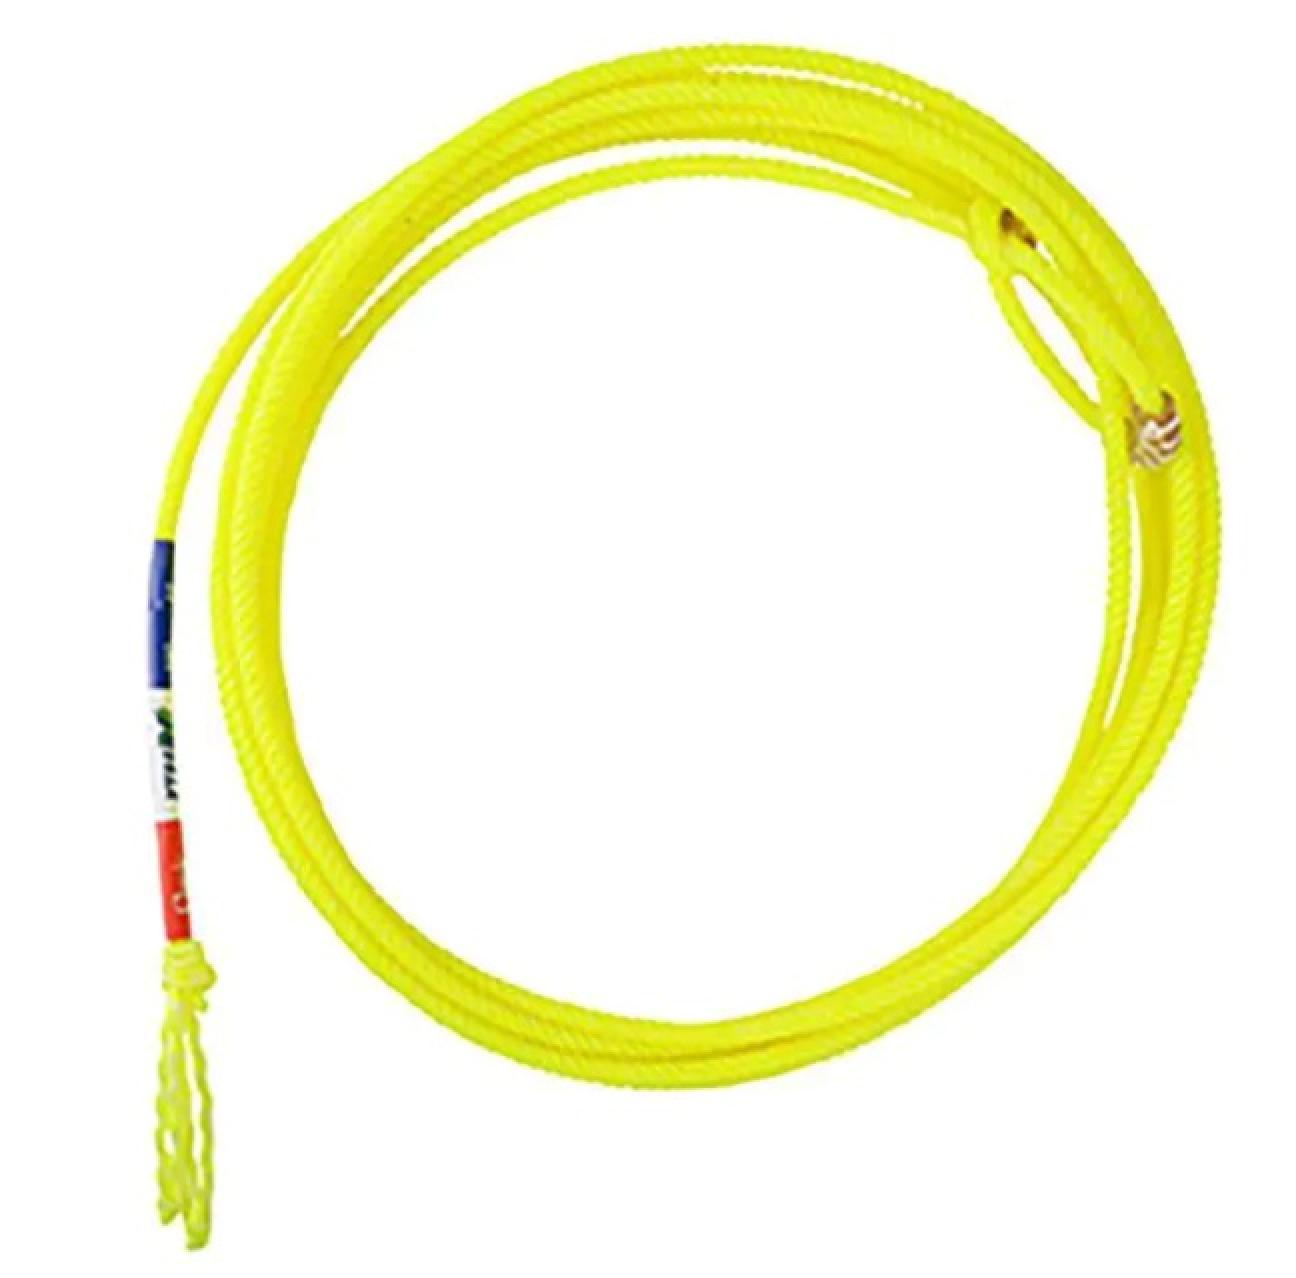 Equibrand Rattler Kids Rope Extreme 4 Strand Poly Yellow